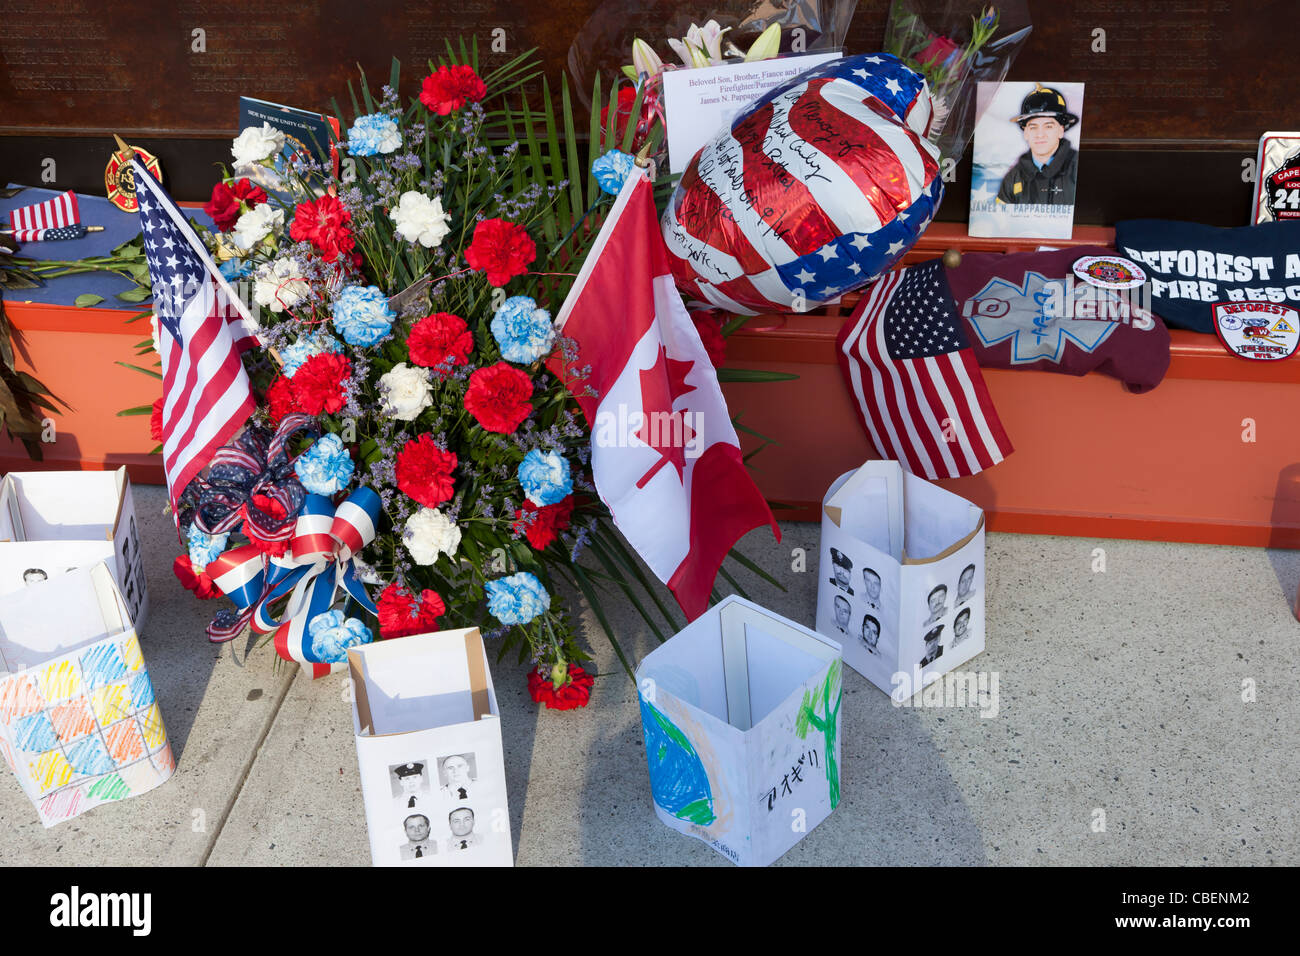 Mementos and remembrances of those lost in the events of 9/11 left at the Firefighters Memorial Wall in New York City. Stock Photo